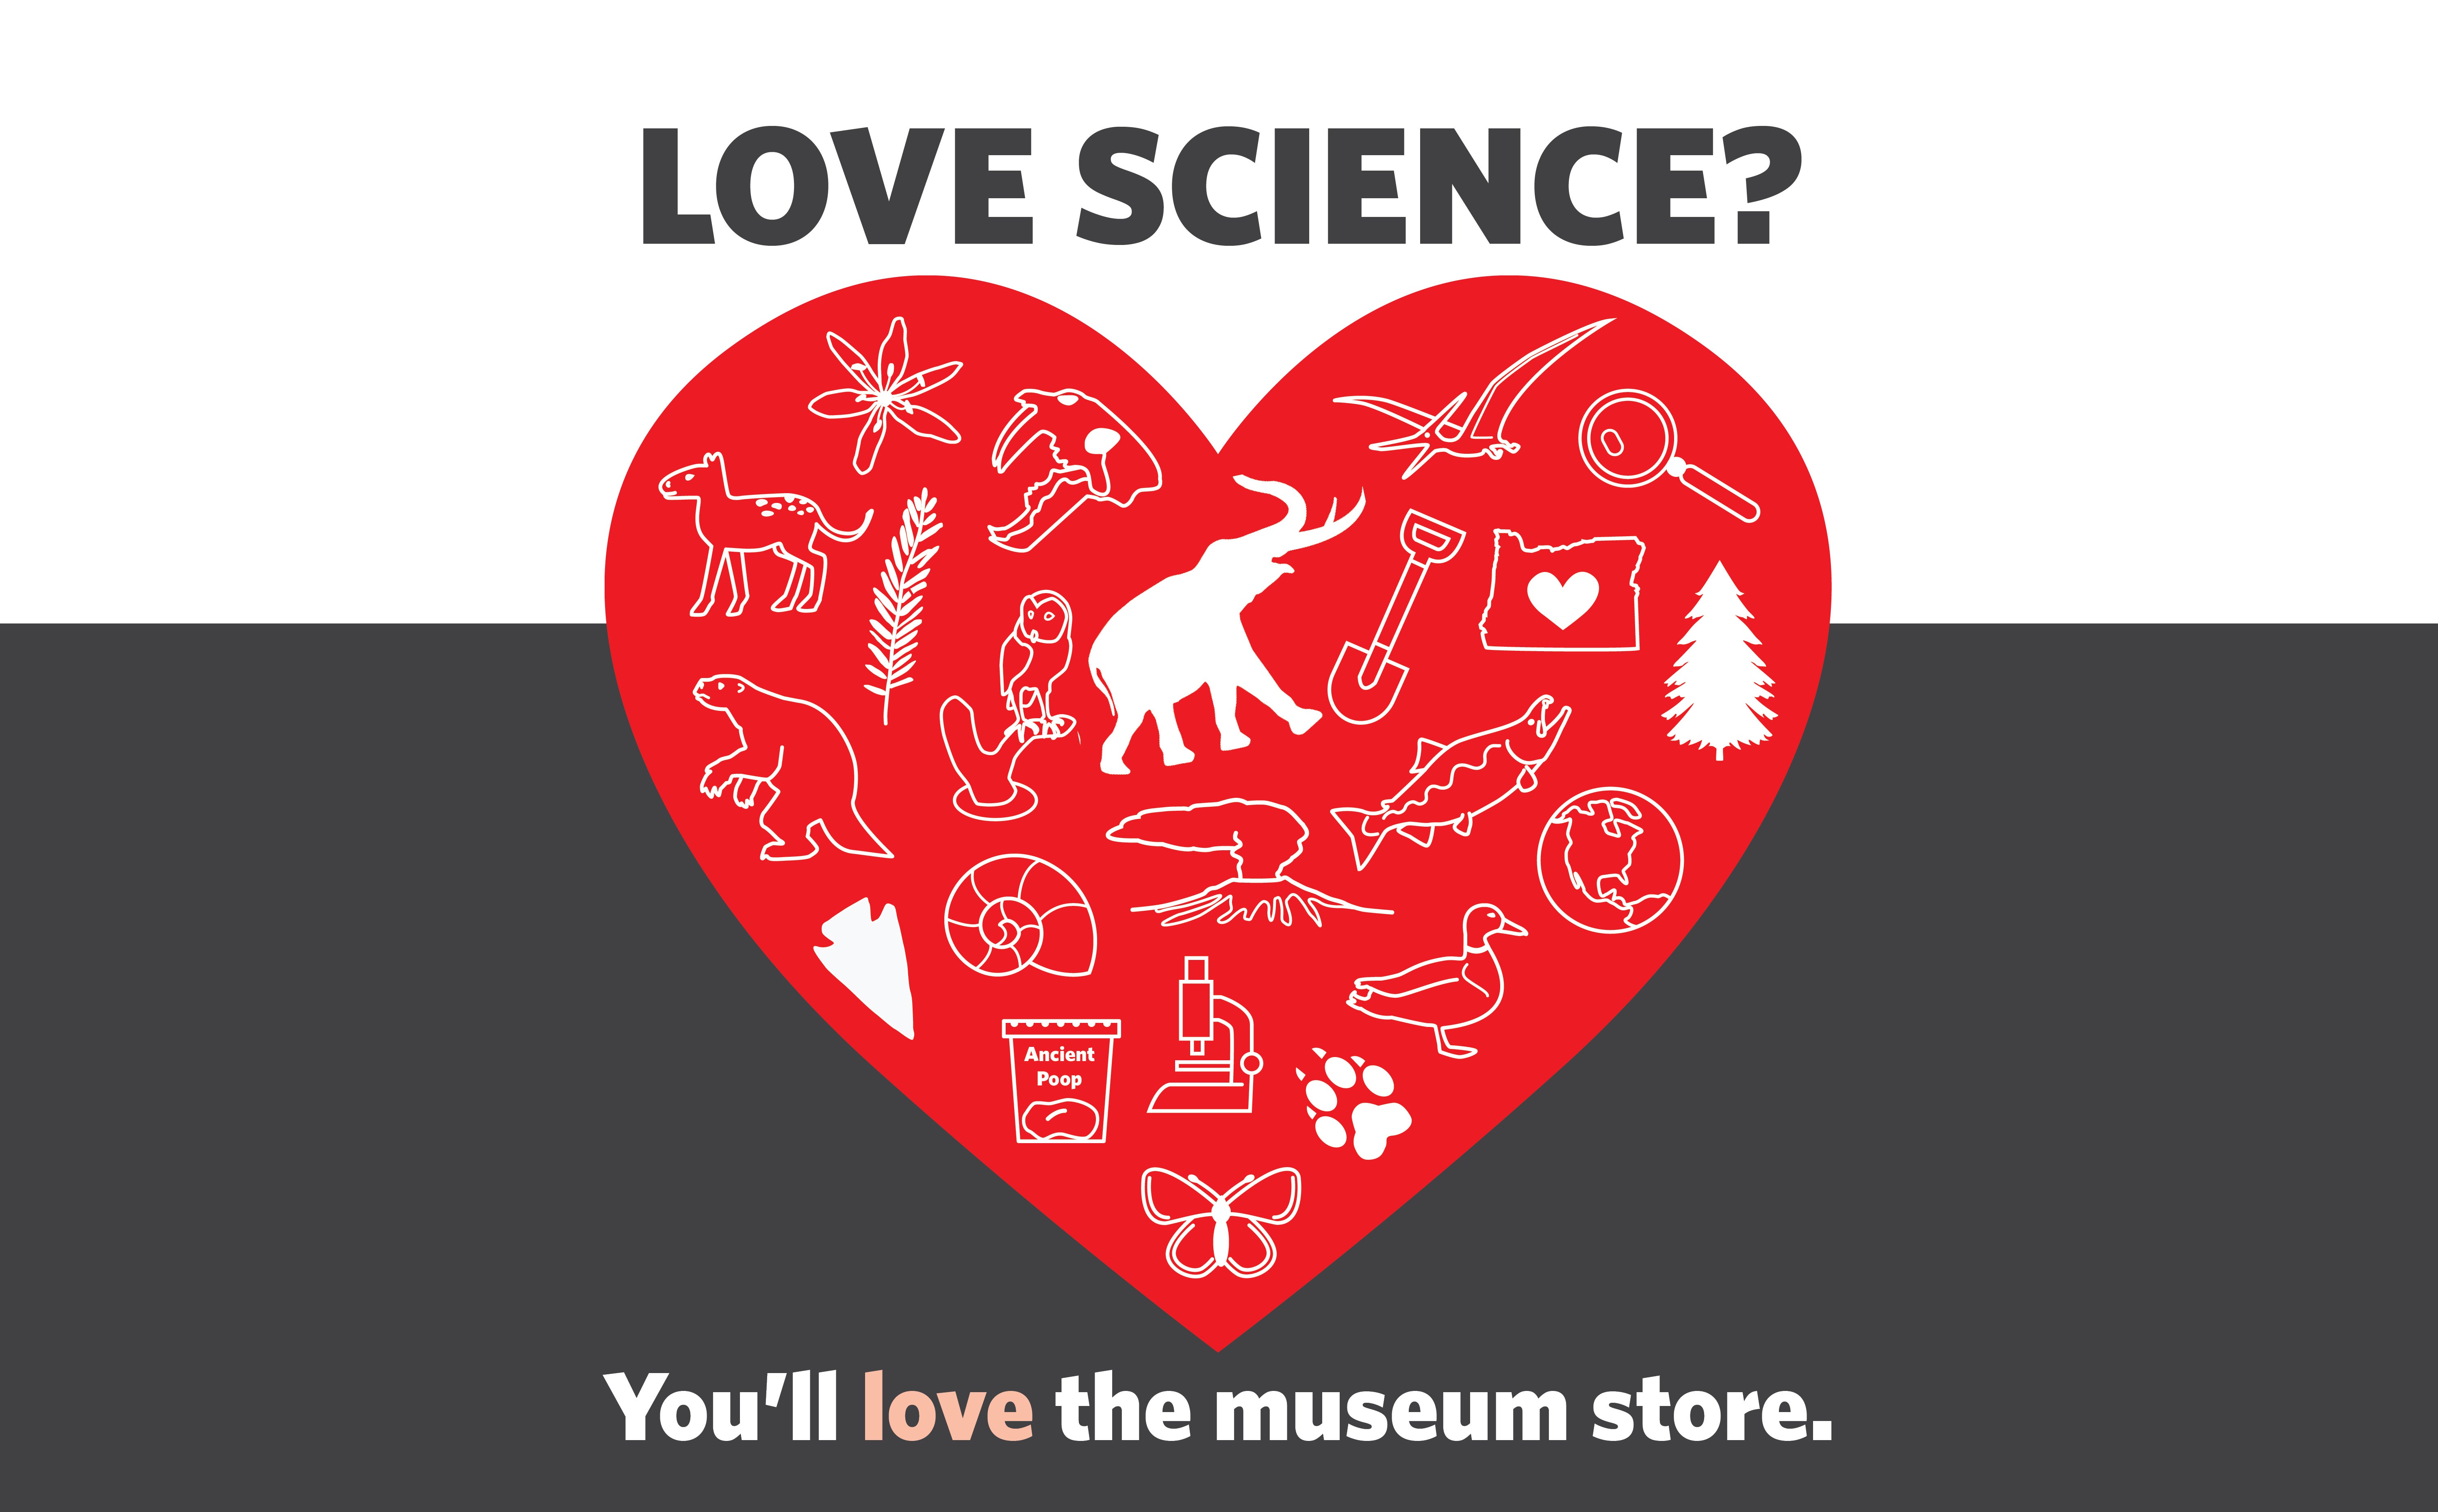 Heart with text "Love Science? You'll love the museum store."